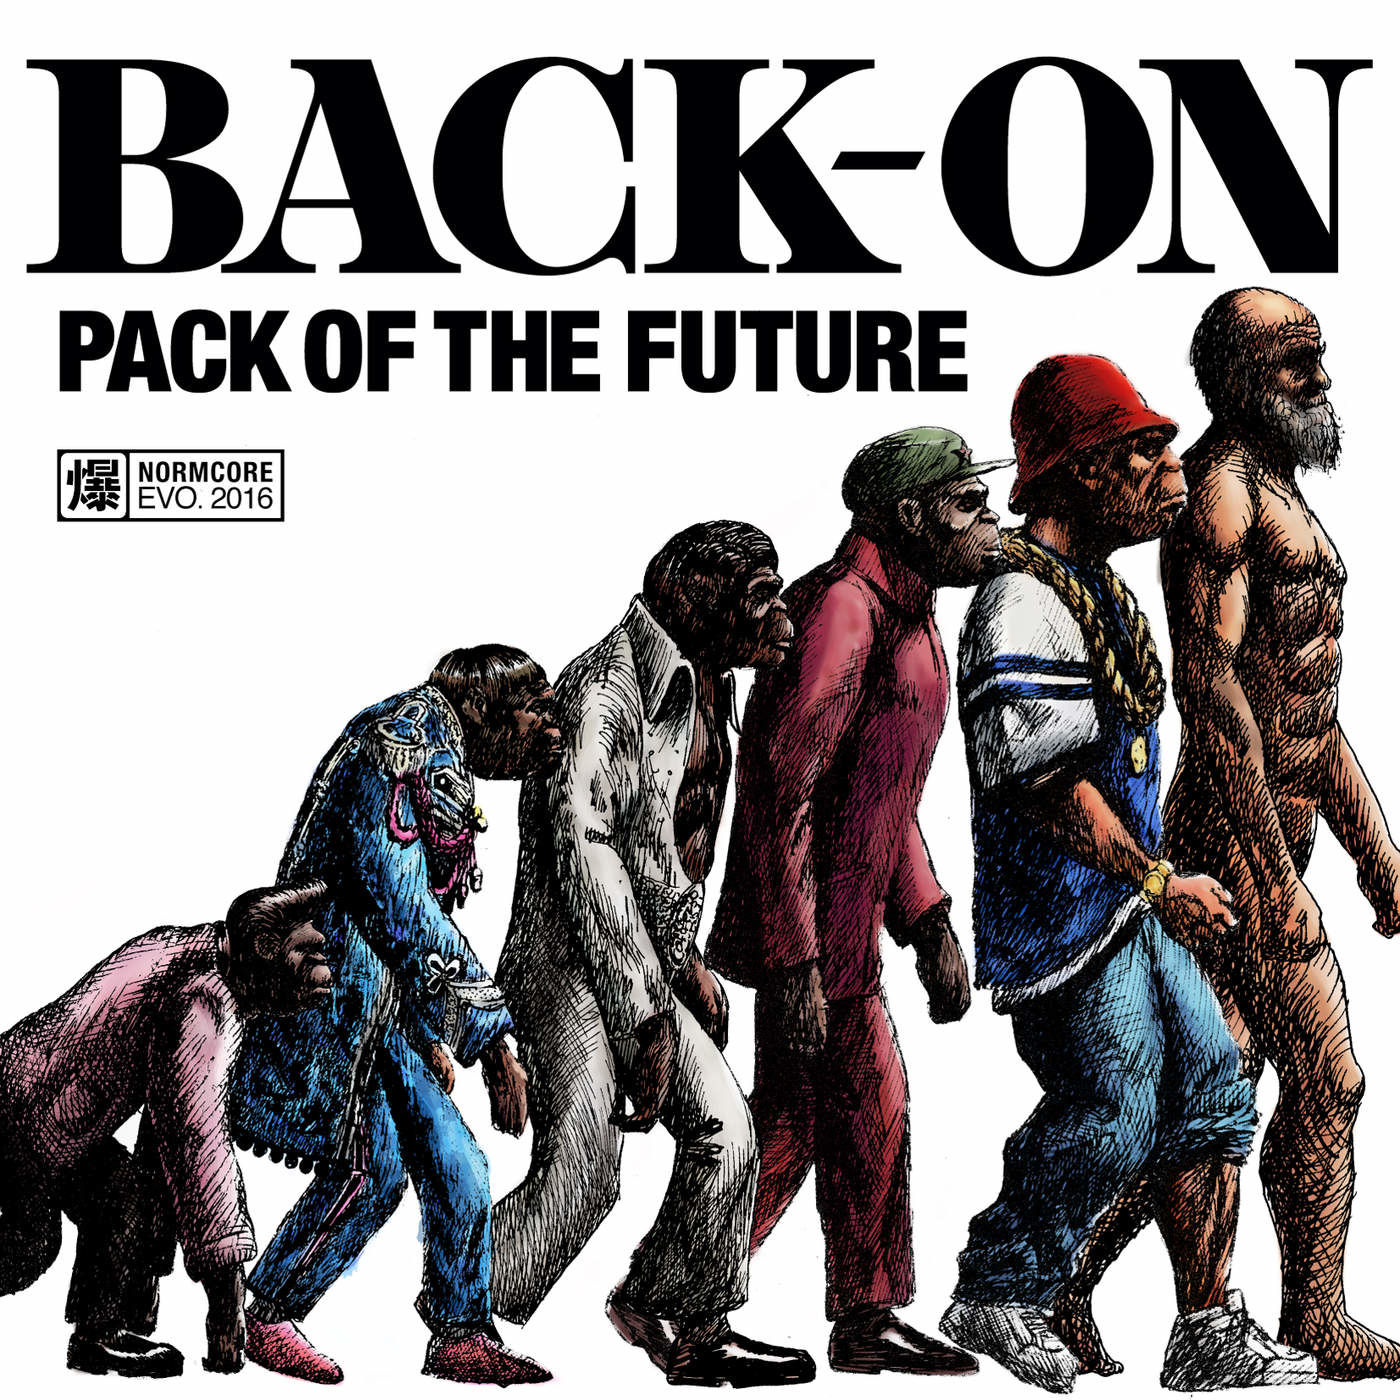 BACK-ON   PACK OF THE FUTURE - 02 Cerulean